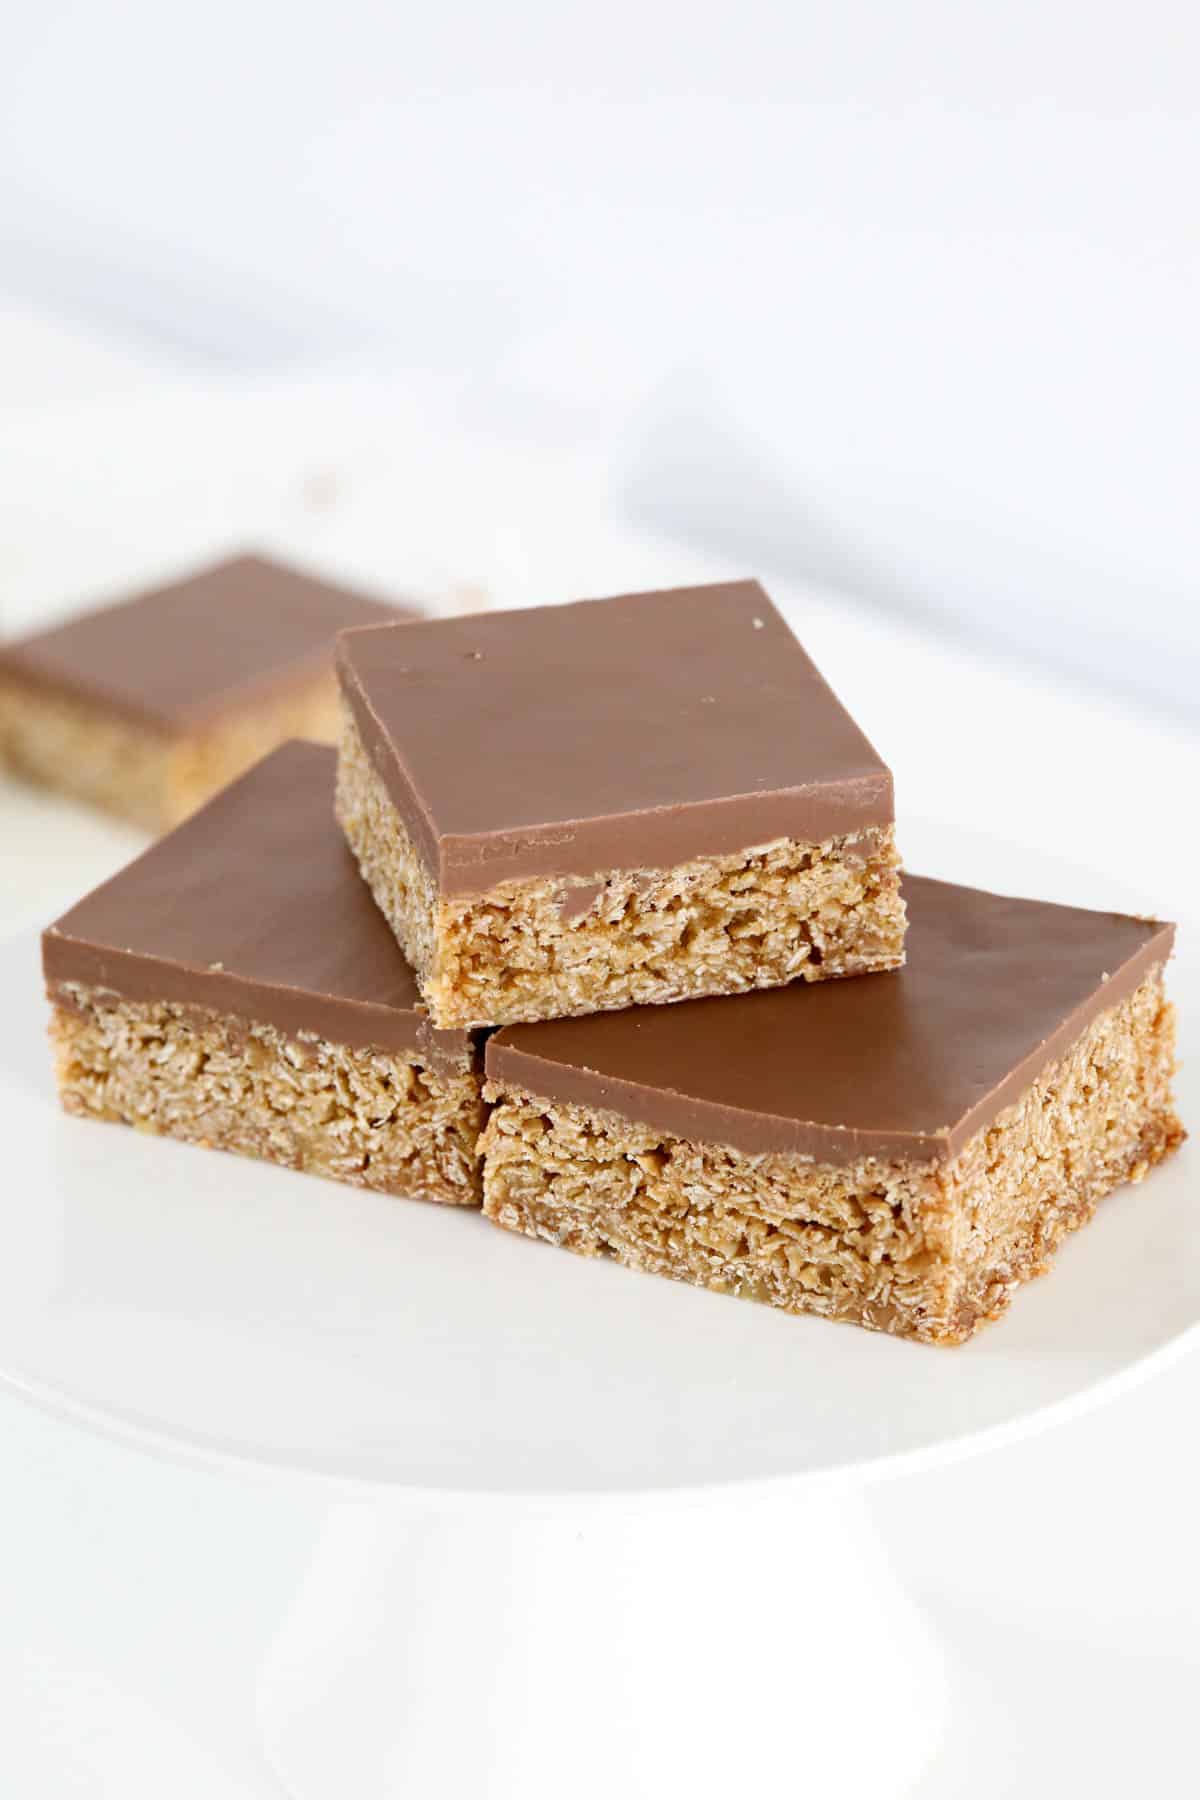 Chocolate topped slice cut into squares and served on a white plate.